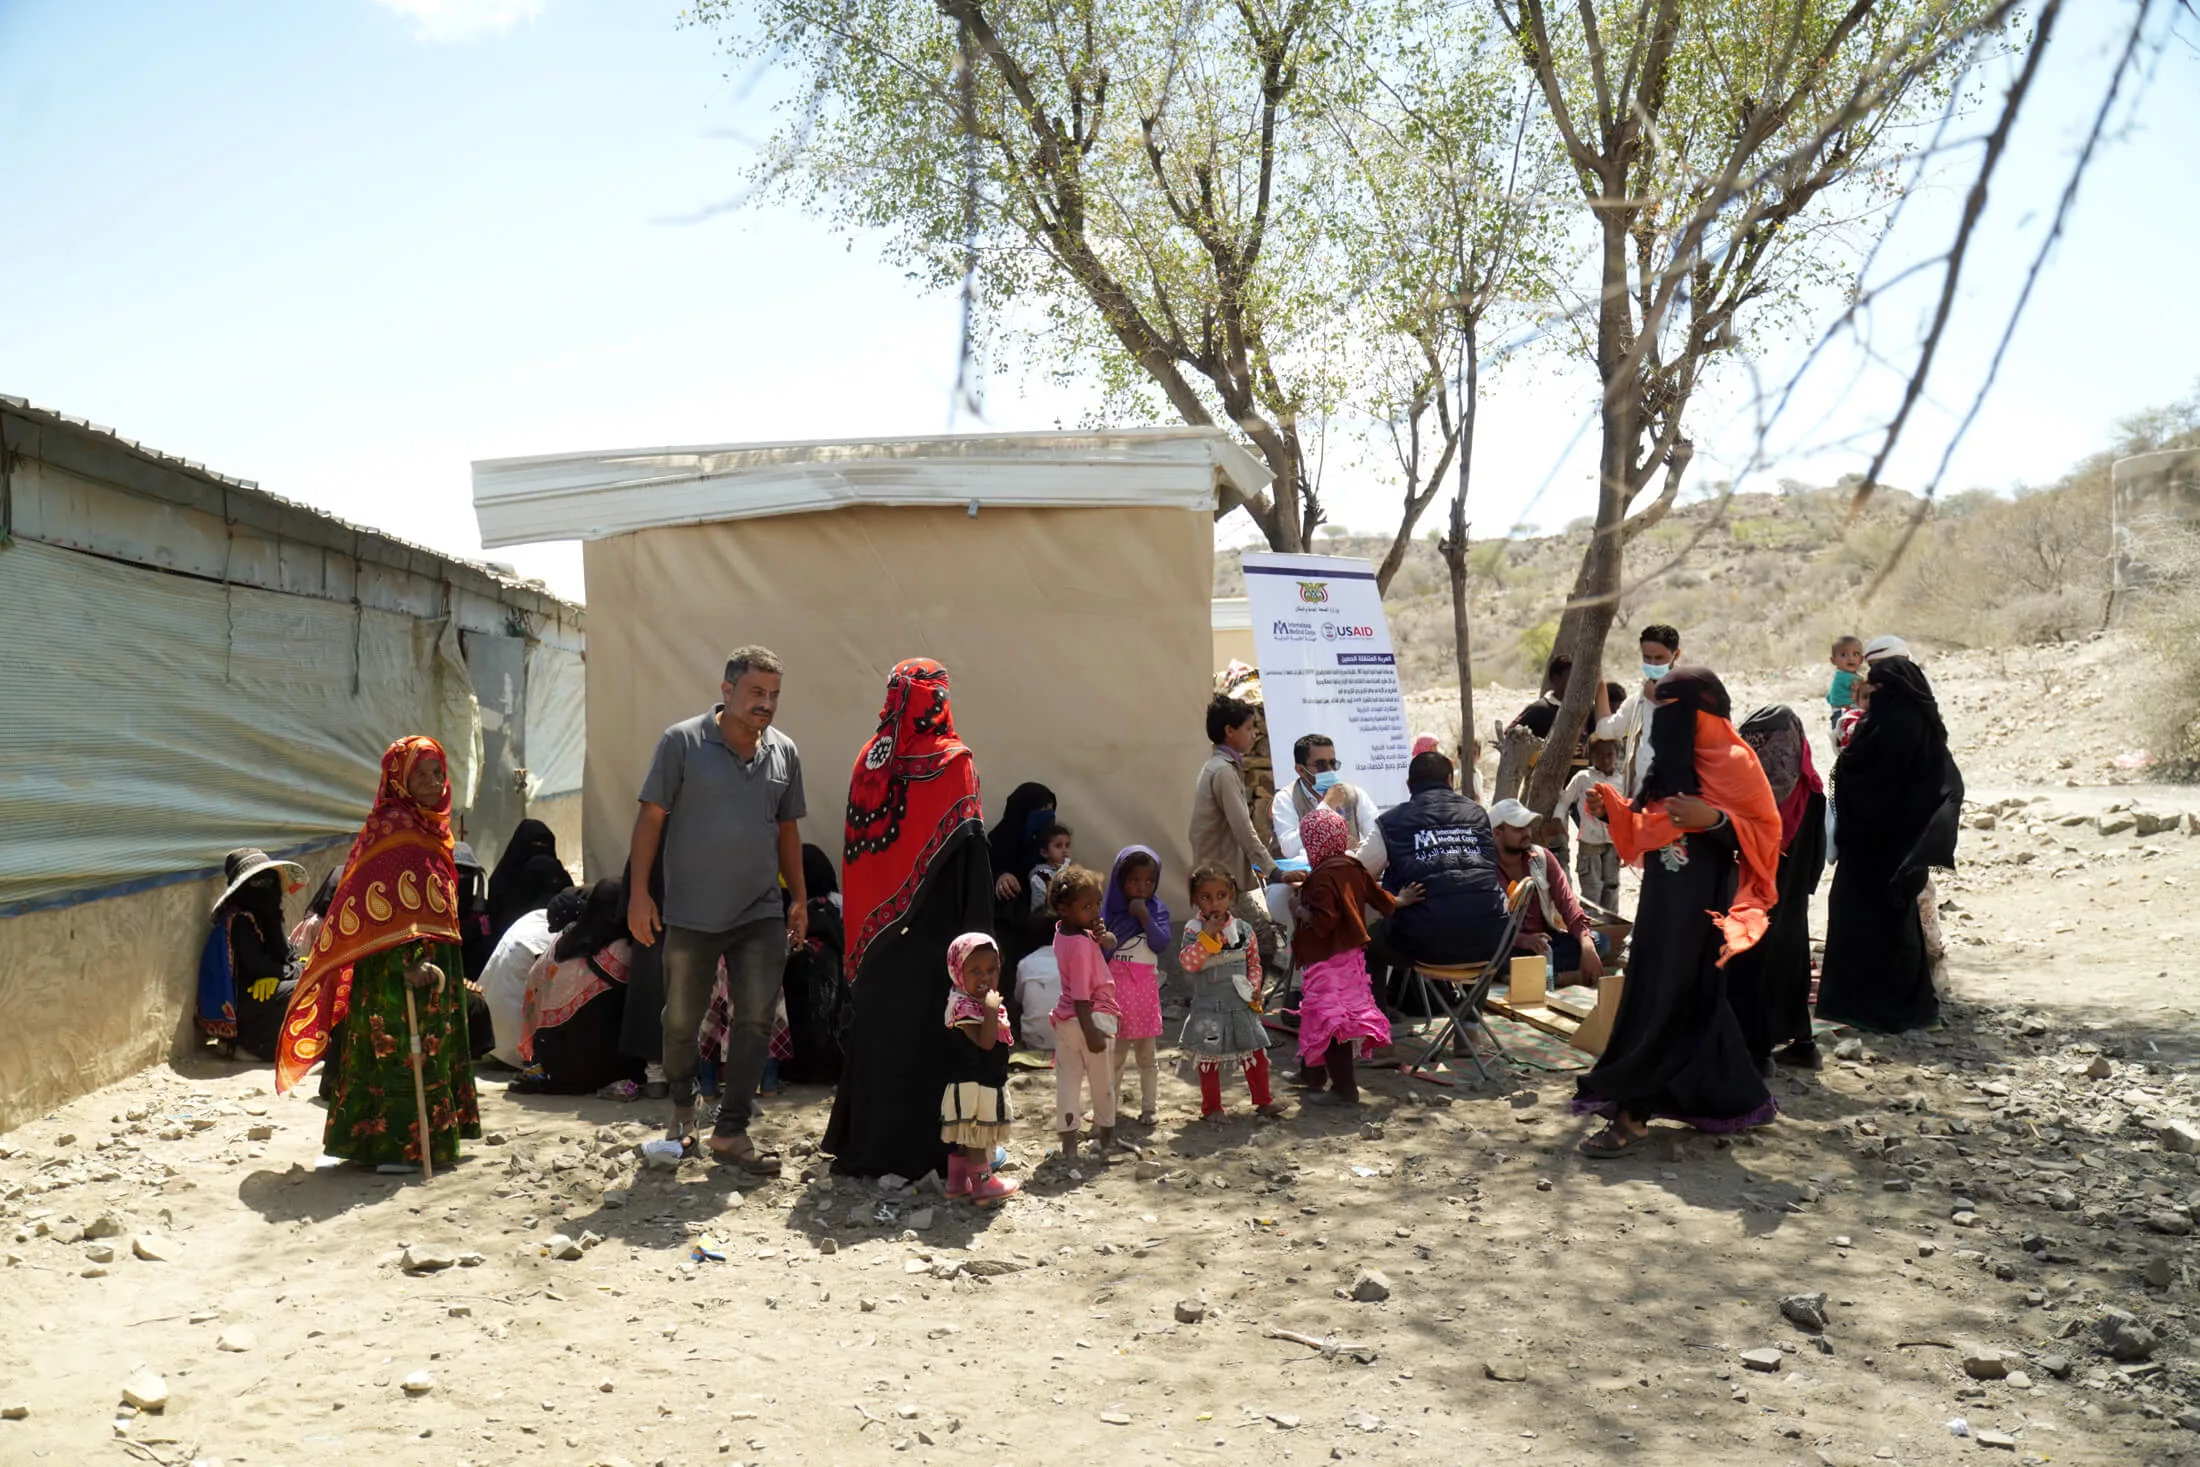 At the Al Jeef camp for internally displaced people in Al Dhale’e governorate, families and children wait in line for services from the mobile medical unit.